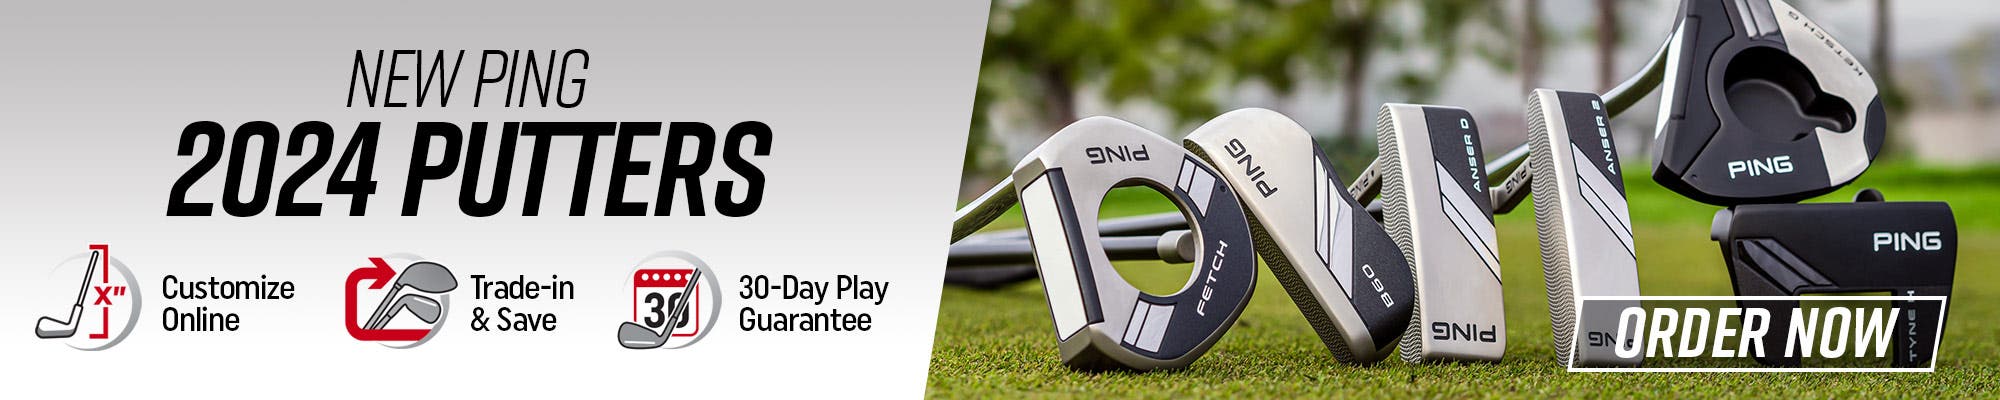 New Ping 2024 Putters | Order Now